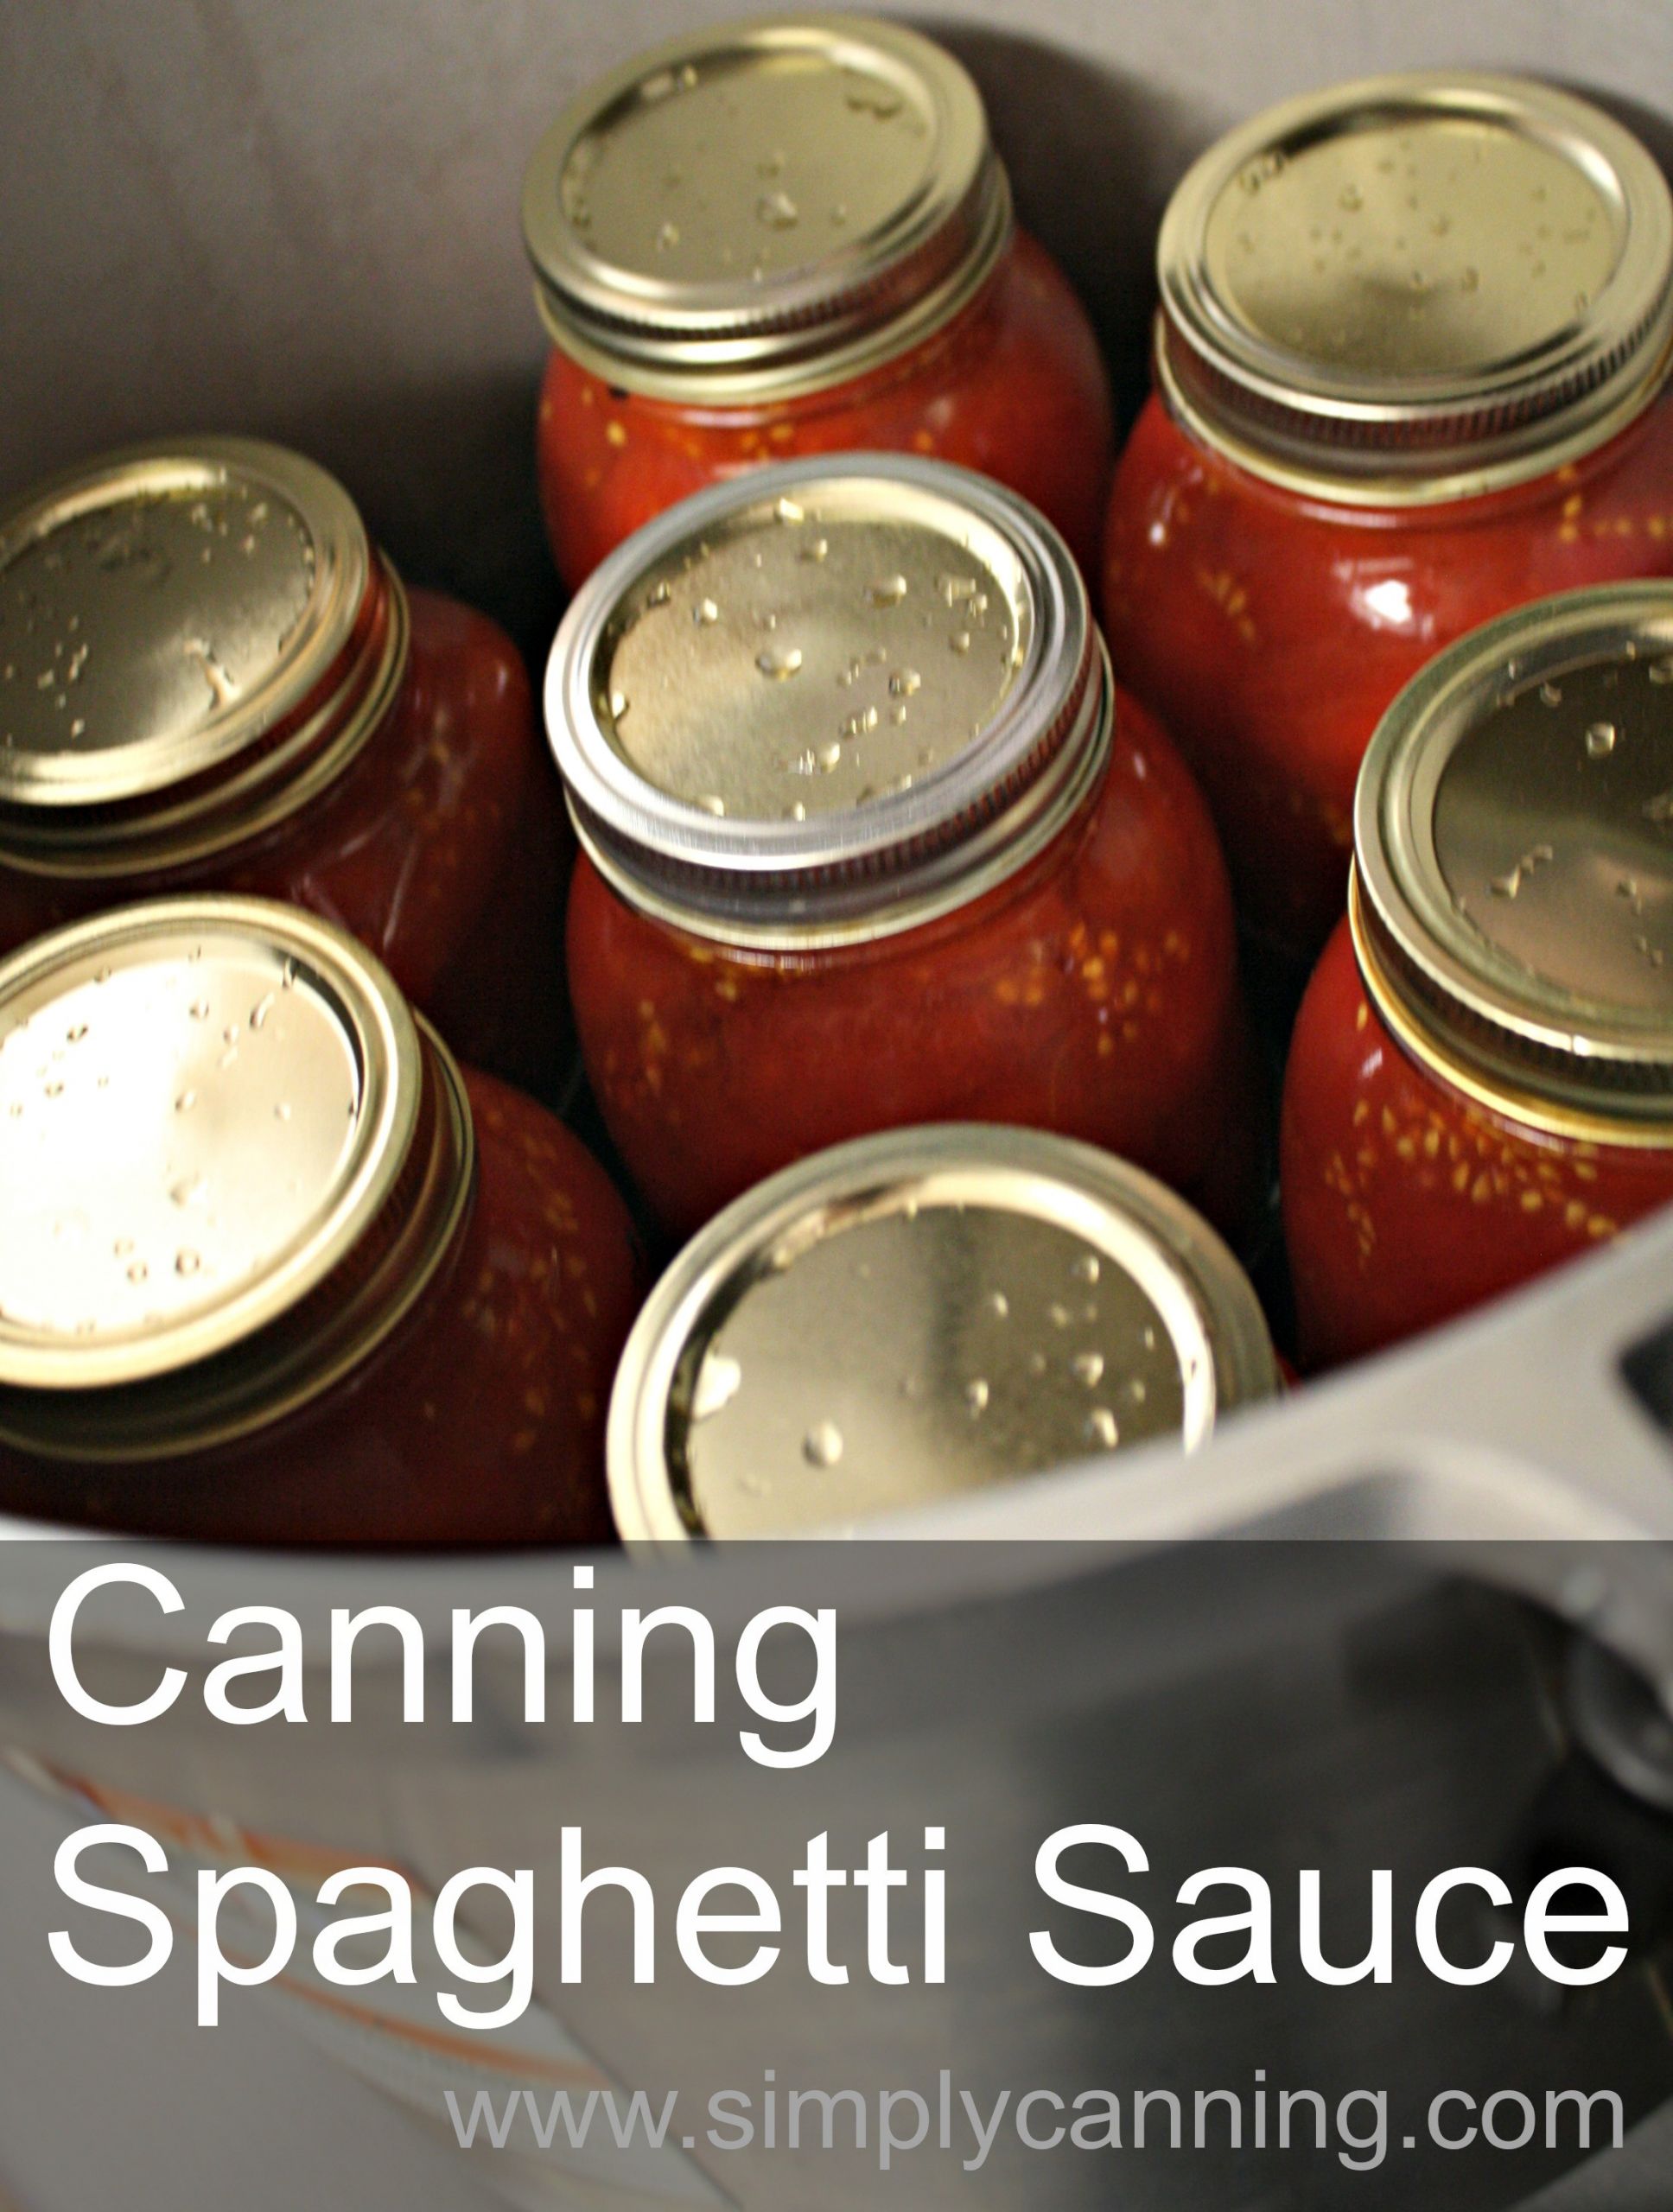 Spaghetti Sauce Recipe For Canning
 Canning Spaghetti Sauce Recipe with meat that will save